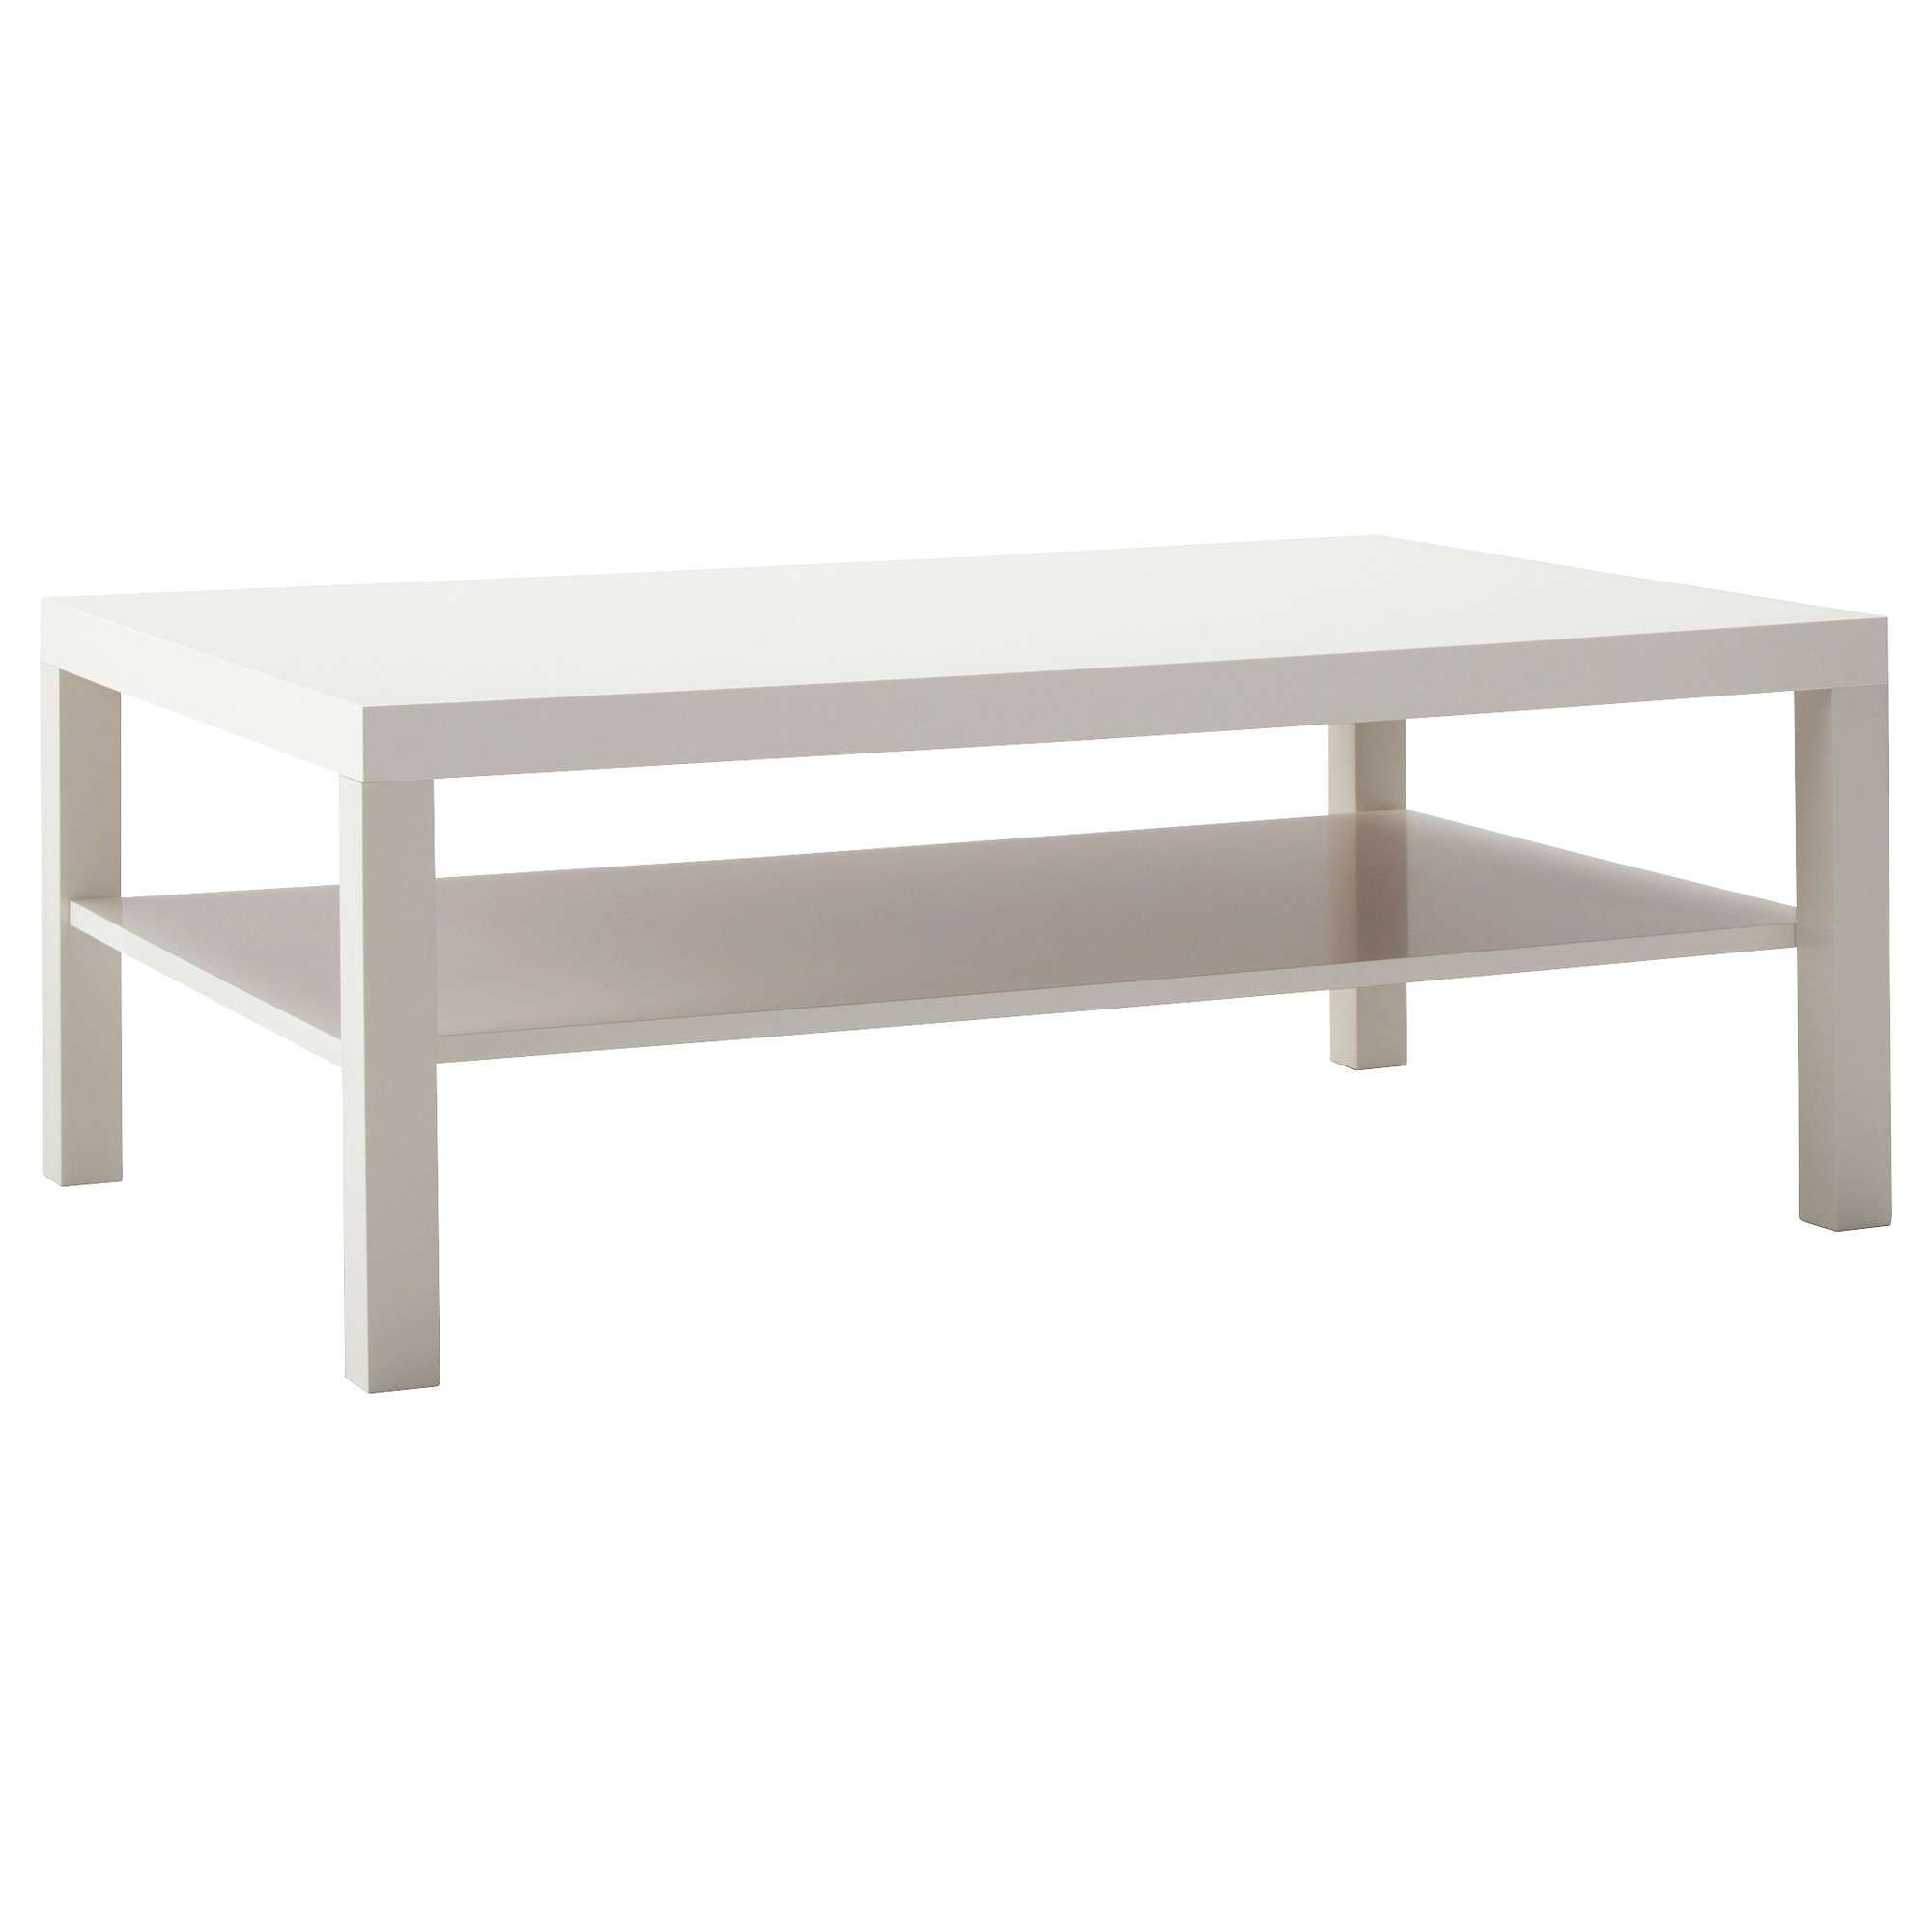 Lack Coffee Table – White – Ikea Regarding Widely Used Red Gloss Coffee Tables (View 15 of 20)